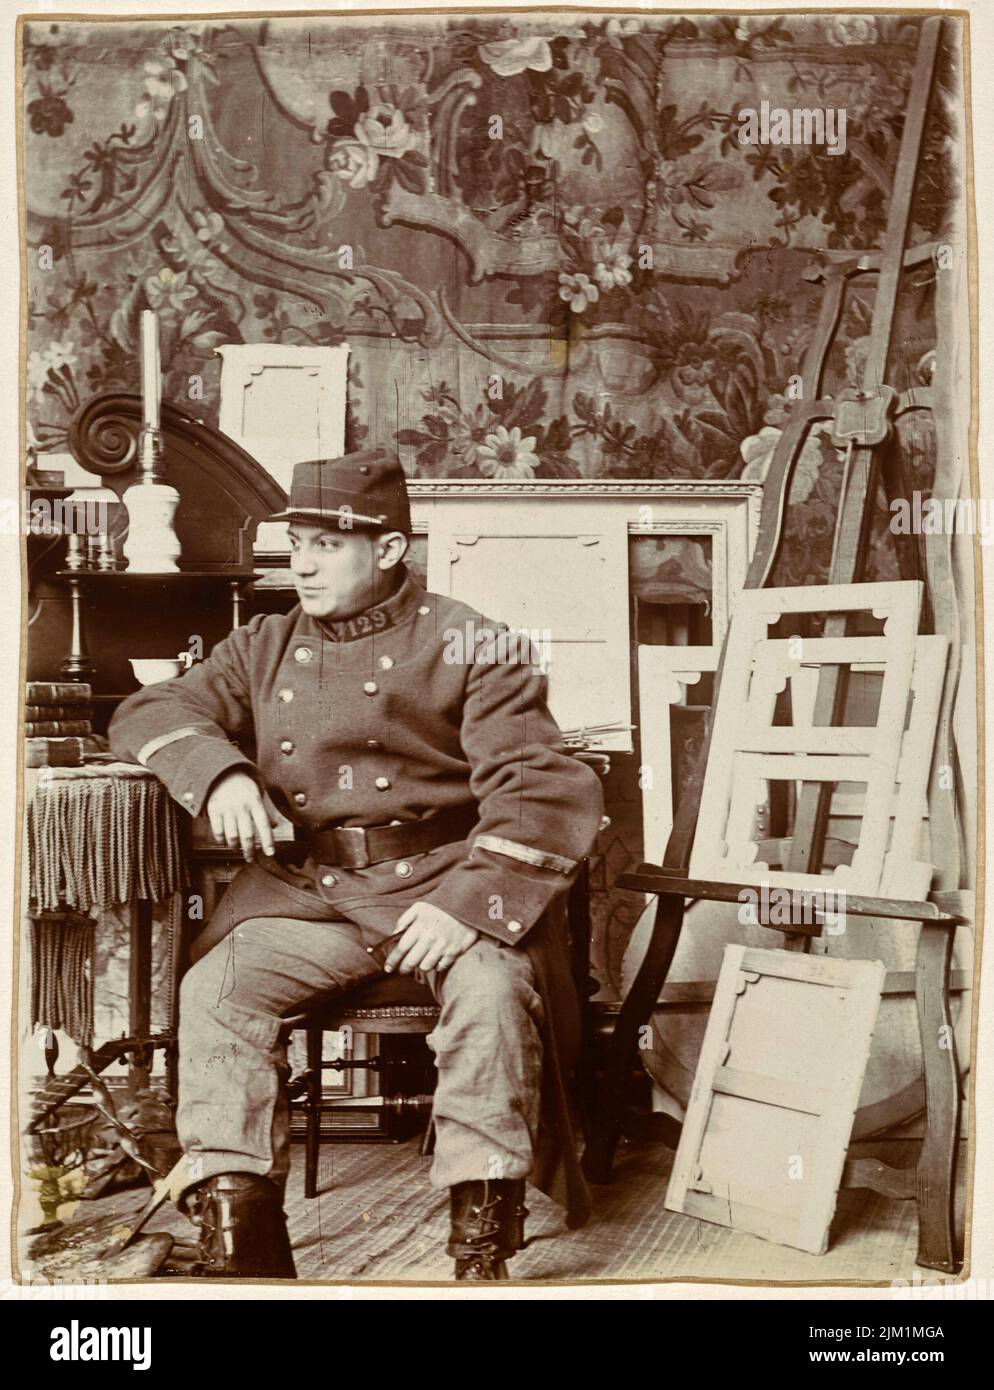 Pablo Picasso in his studio wearing Georges Braque's military uniform. Museum: PRIVATE COLLECTION. Stock Photo